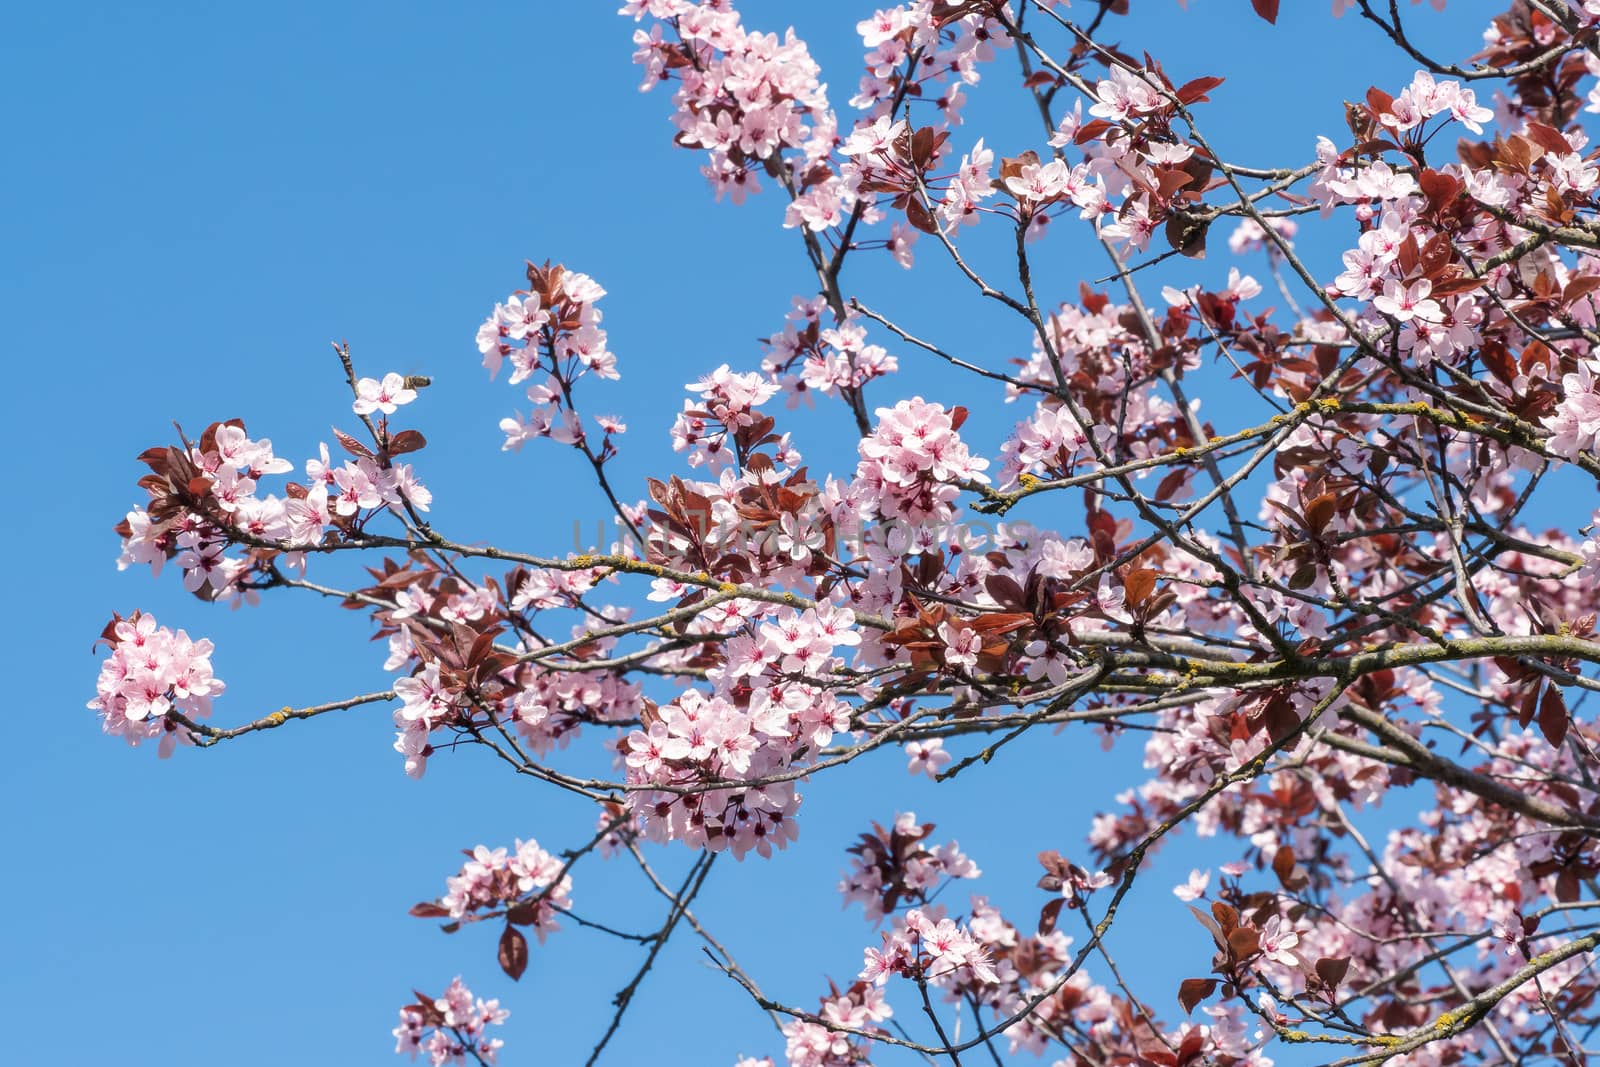 Spring cherry blossoms, pink flowers on a blue sky. Spring floral background. Cherry flowers blossoming in the springtime.